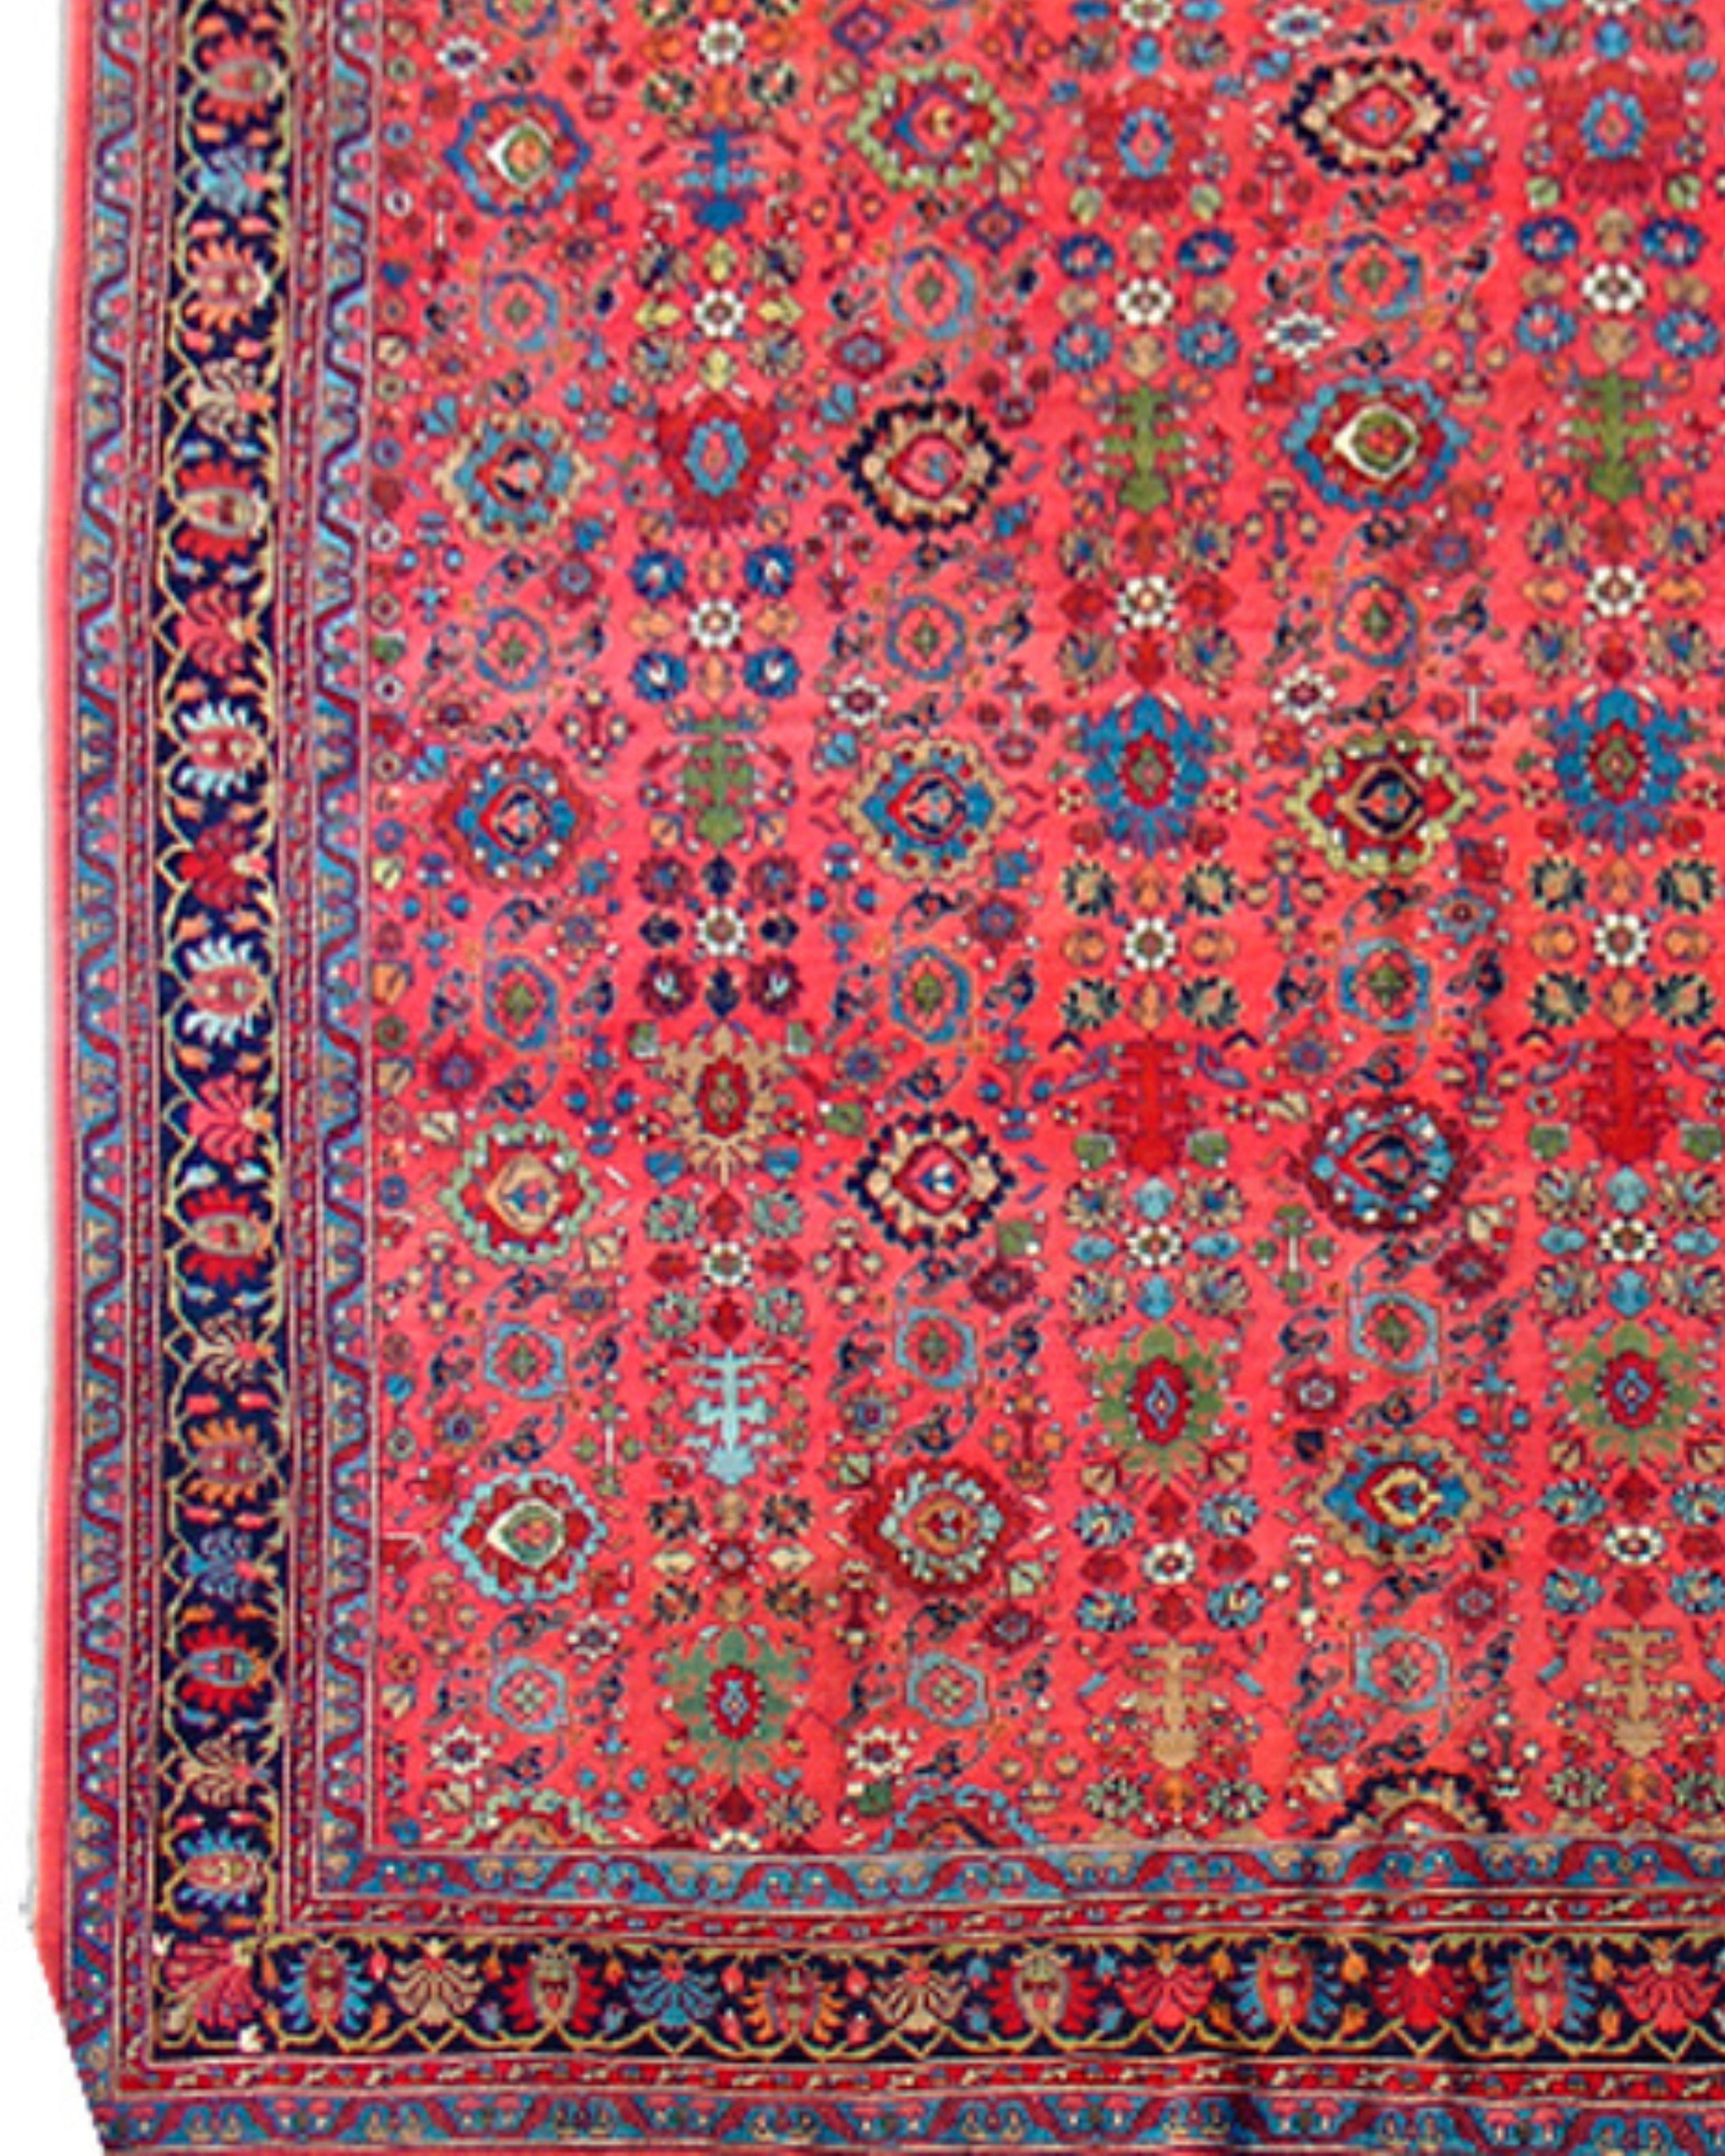 Hand-Knotted Antique Oversized Persian Bidjar Carpet, Early 20th Century For Sale